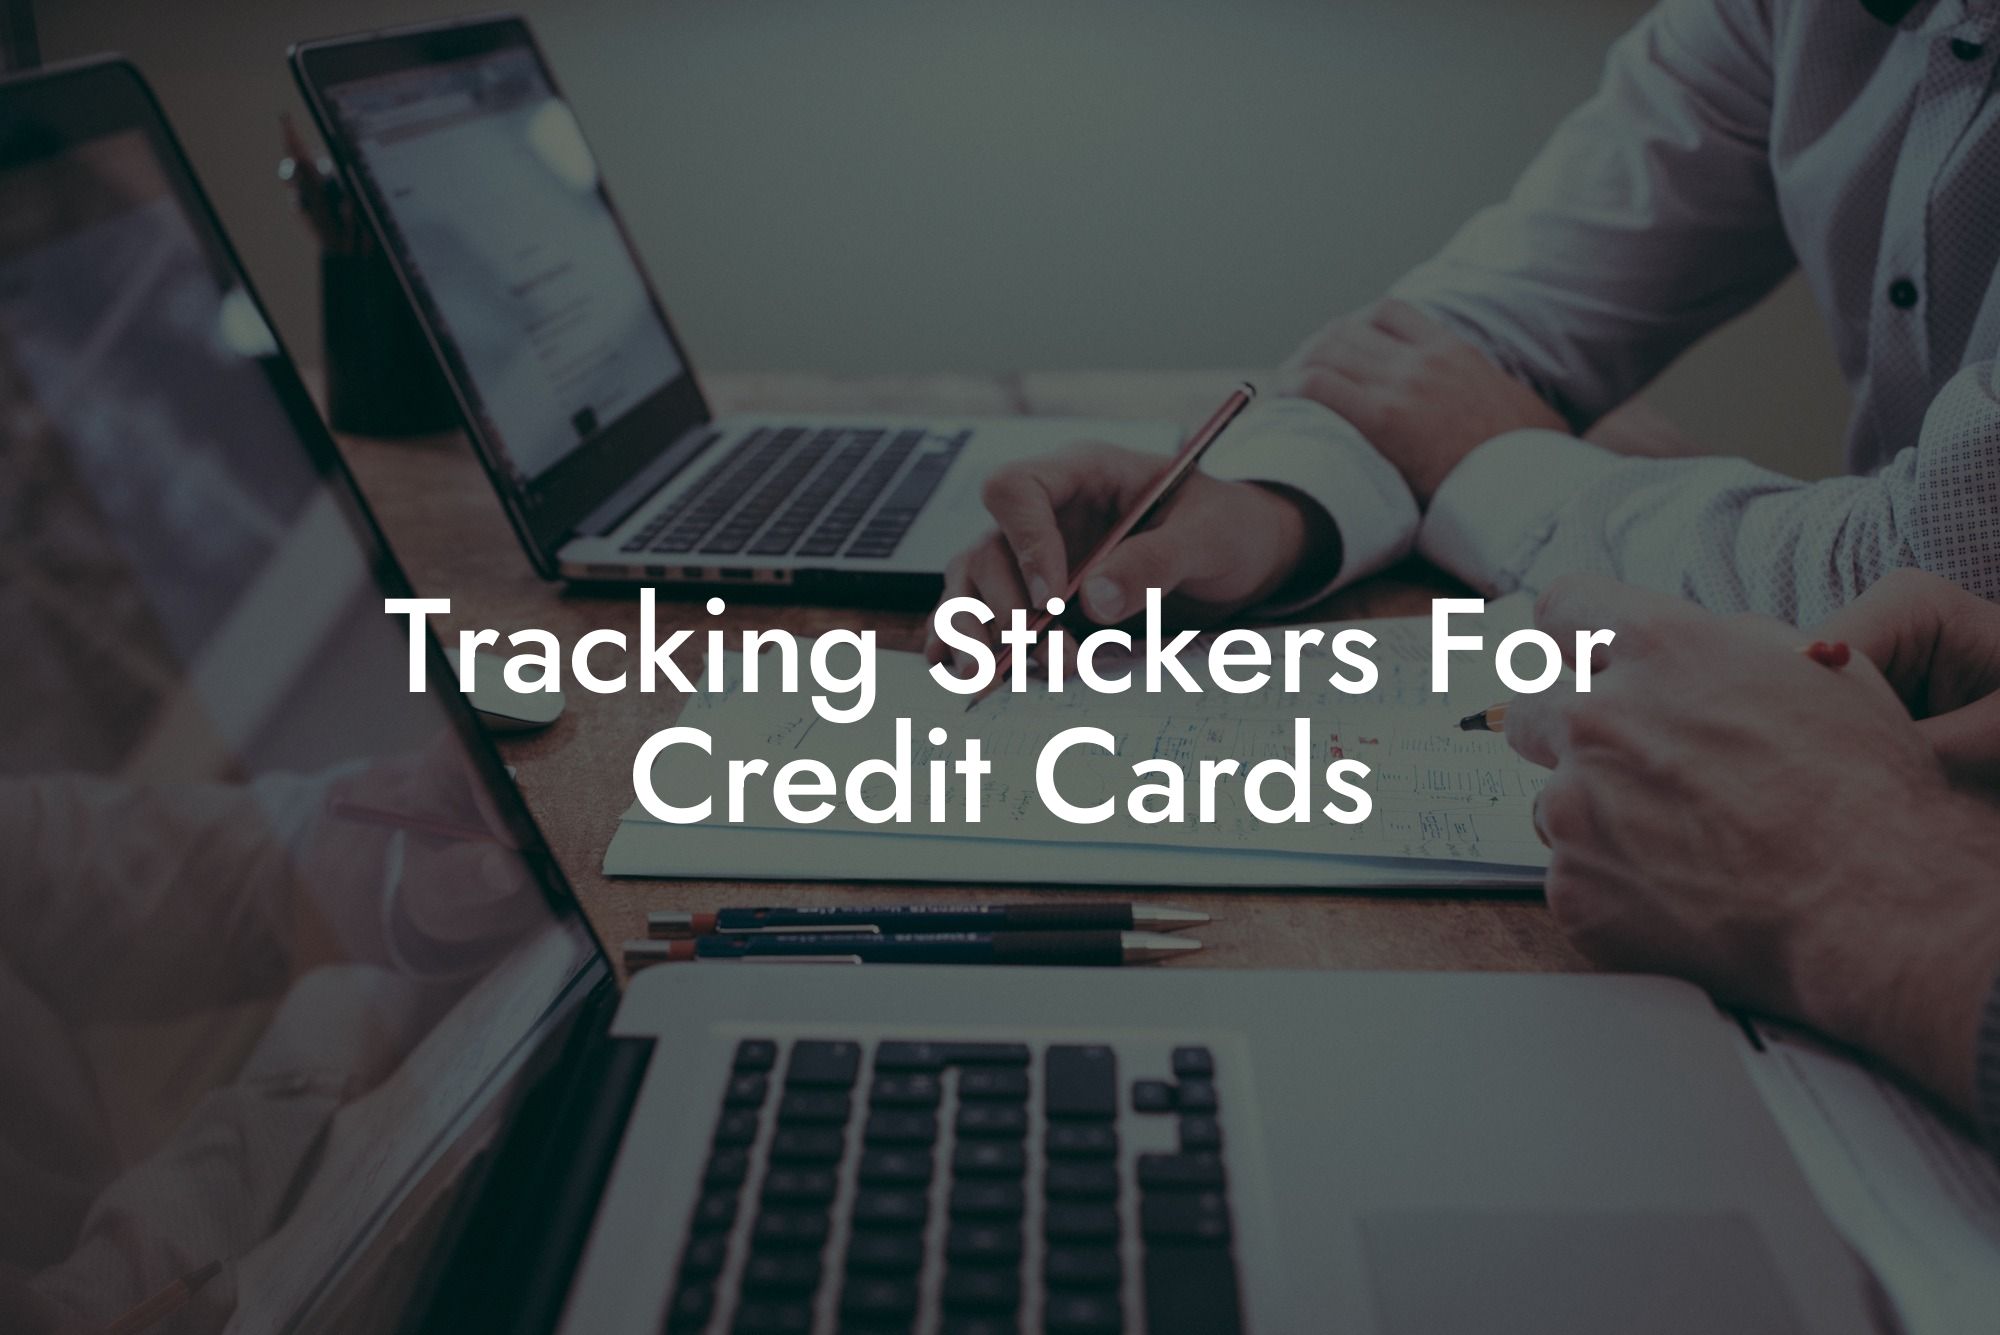 Tracking Stickers For Credit Cards